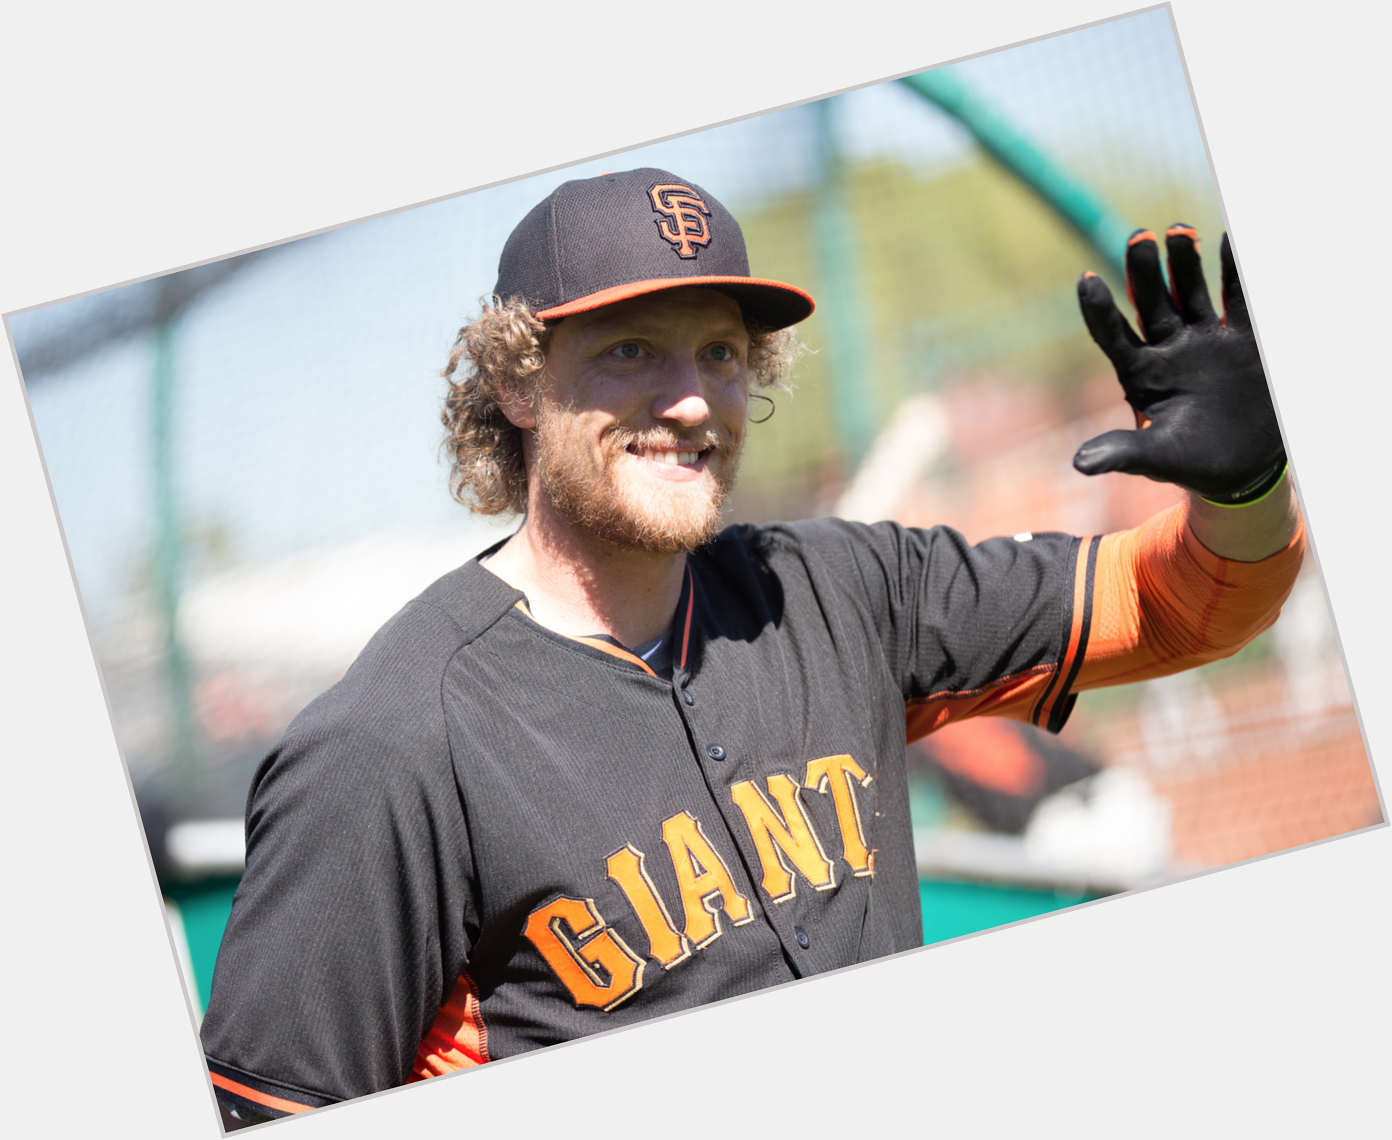 2-time champ, 3-time All-Star.

Happy Birthday, Hunter Pence! 